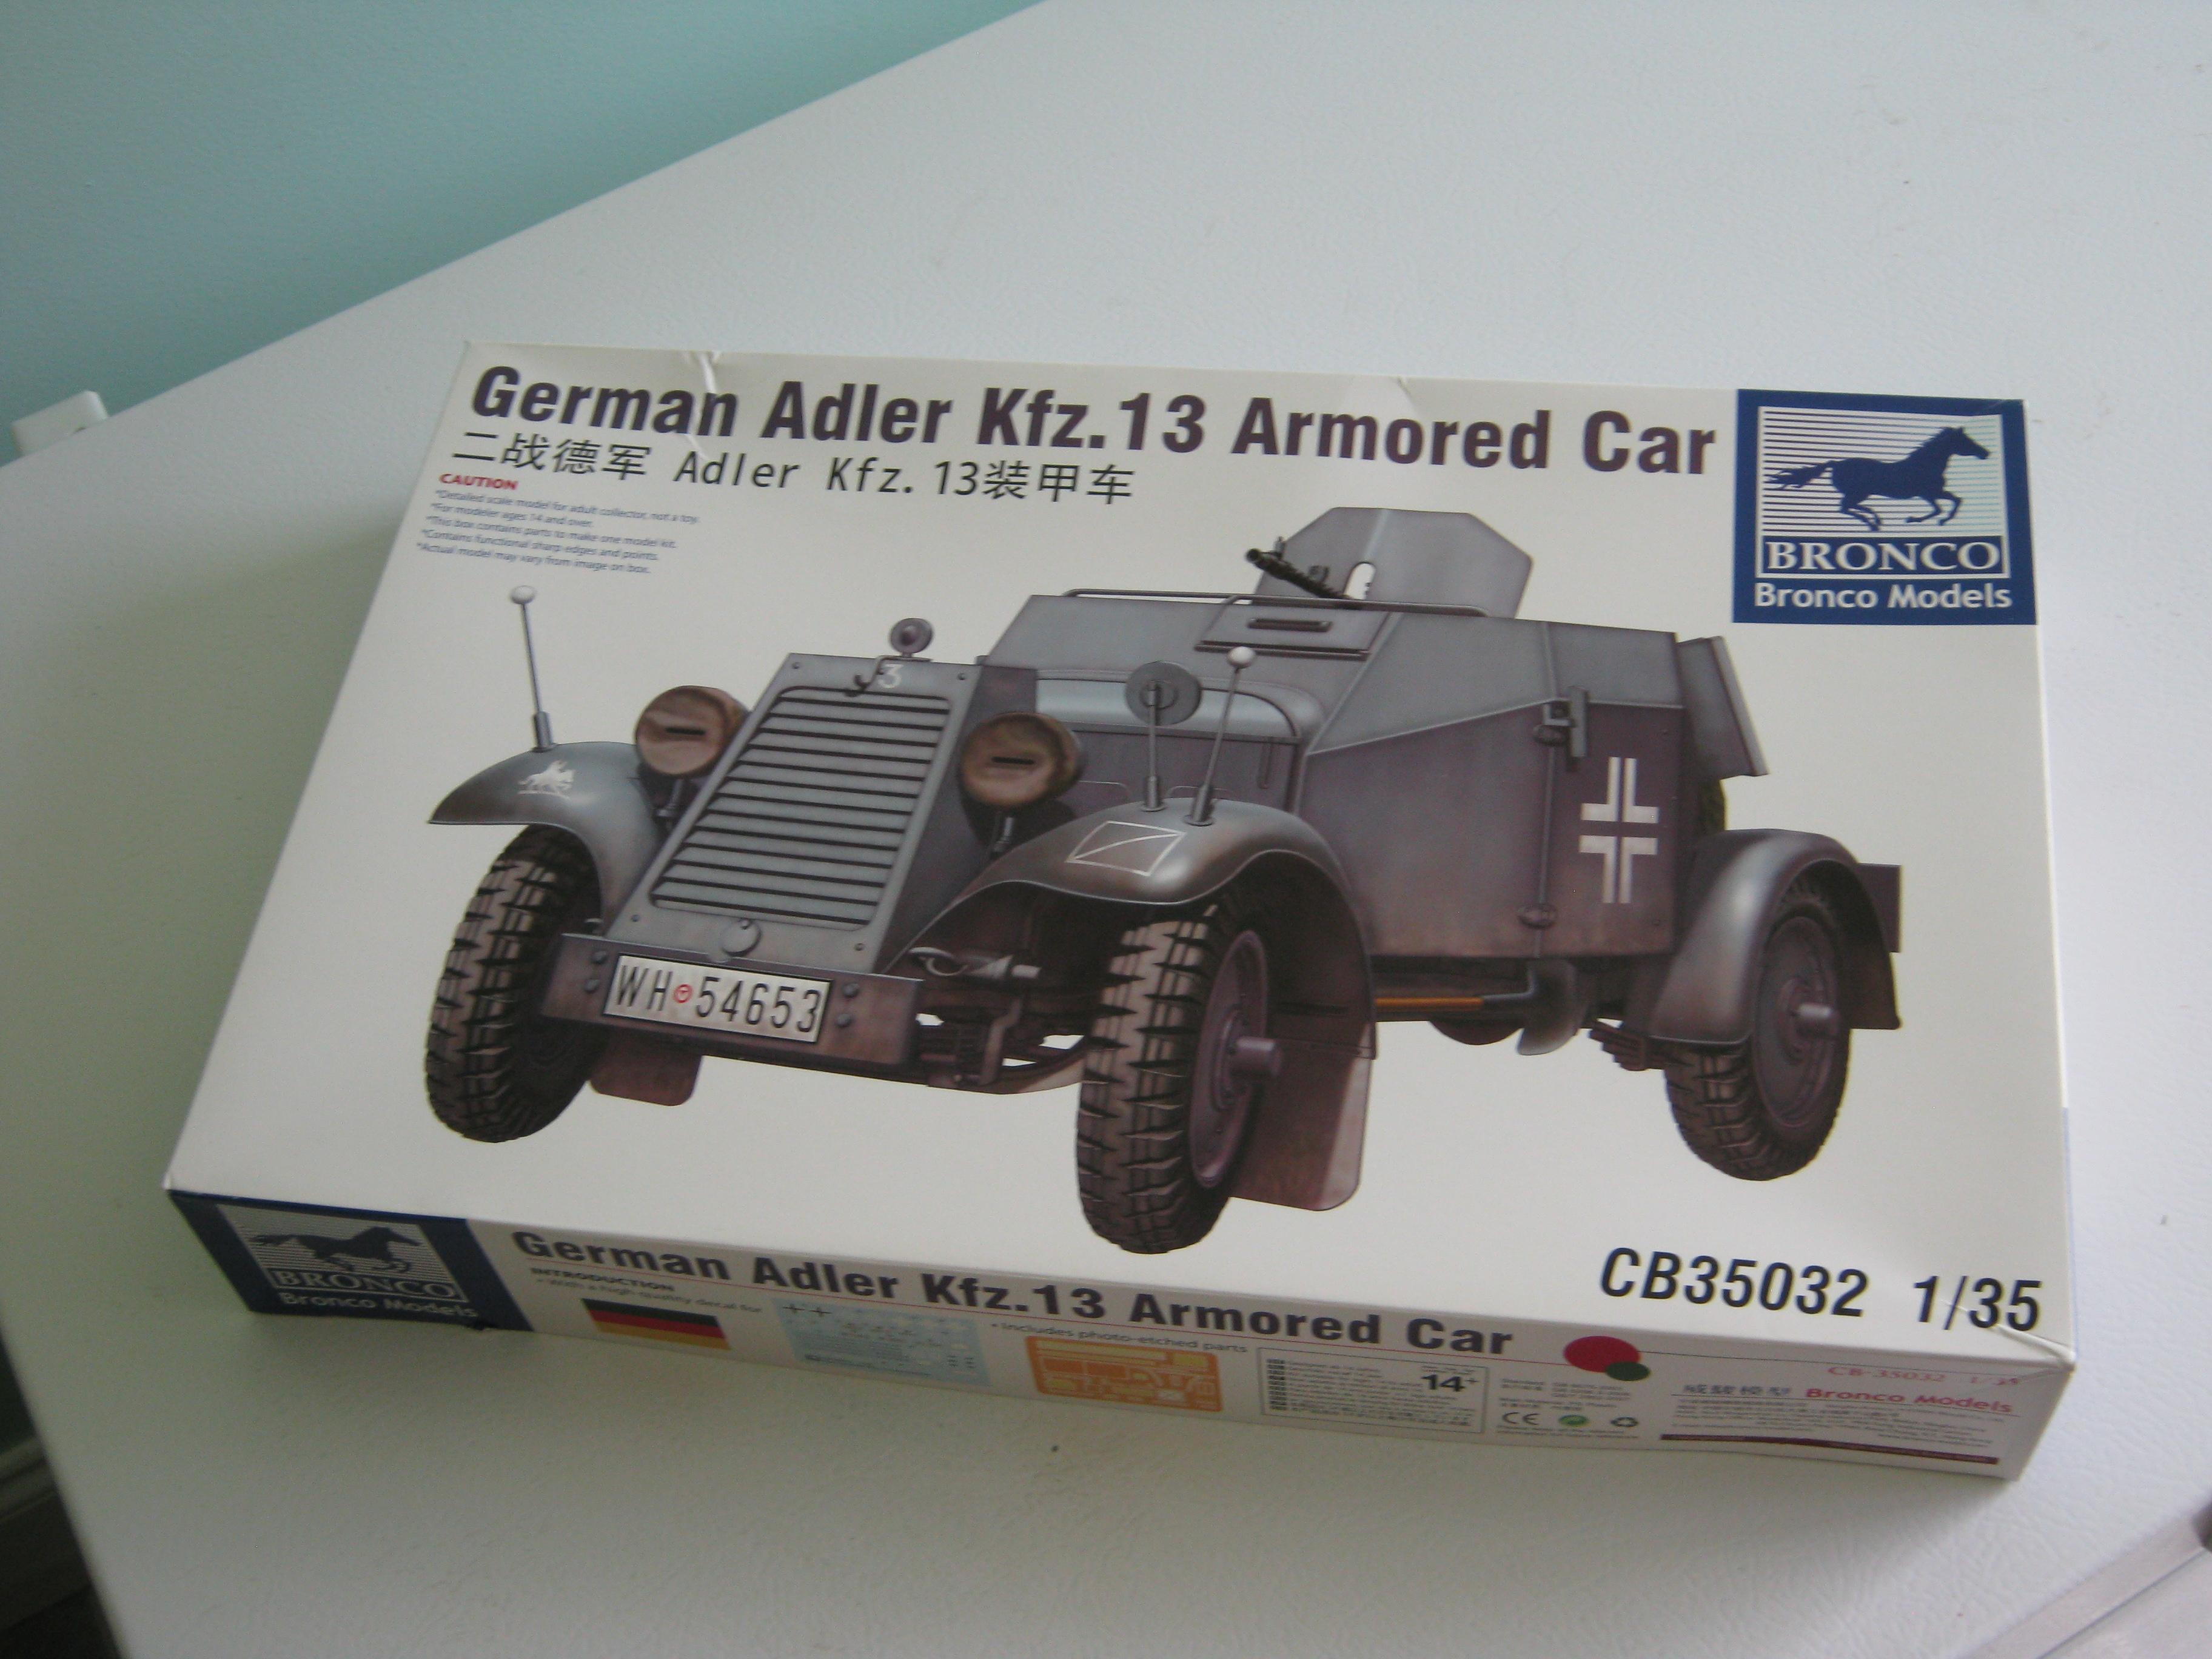 Afv, Armored Car, Conversion, Counts As, Germans, Imperial, Recon Vehicle, Scout Car, Wheeled Vehicle, World War 2